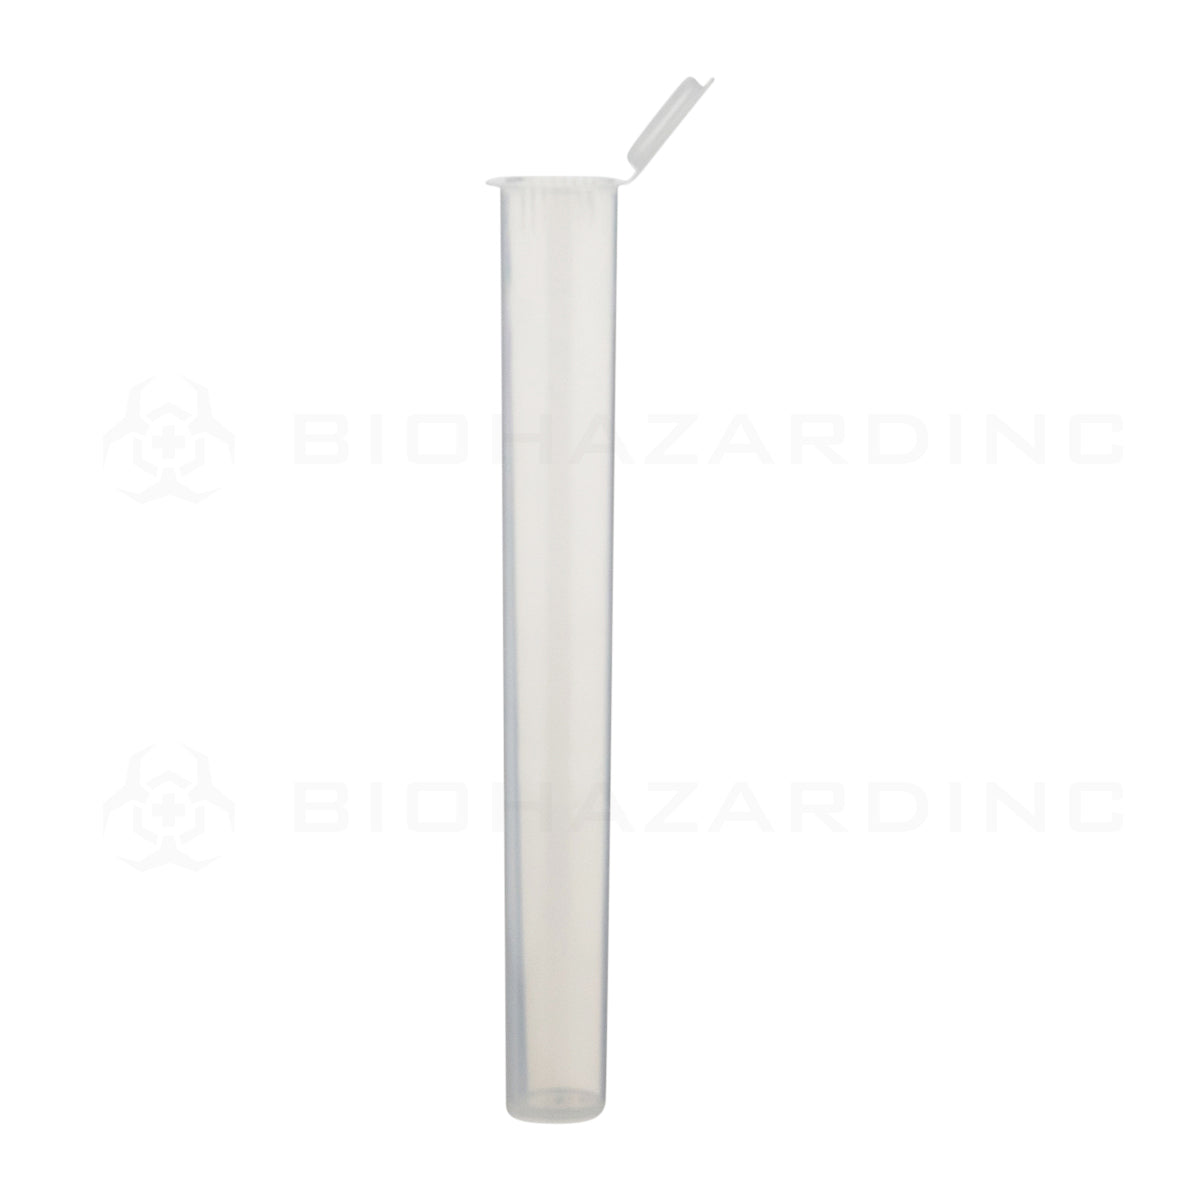 Child Resistant | Pop Top Translucent Plastic Pre-Roll Tubes | 140mm - Clear - 1400 Count Child Resistant Joint Tube Biohazard Inc   